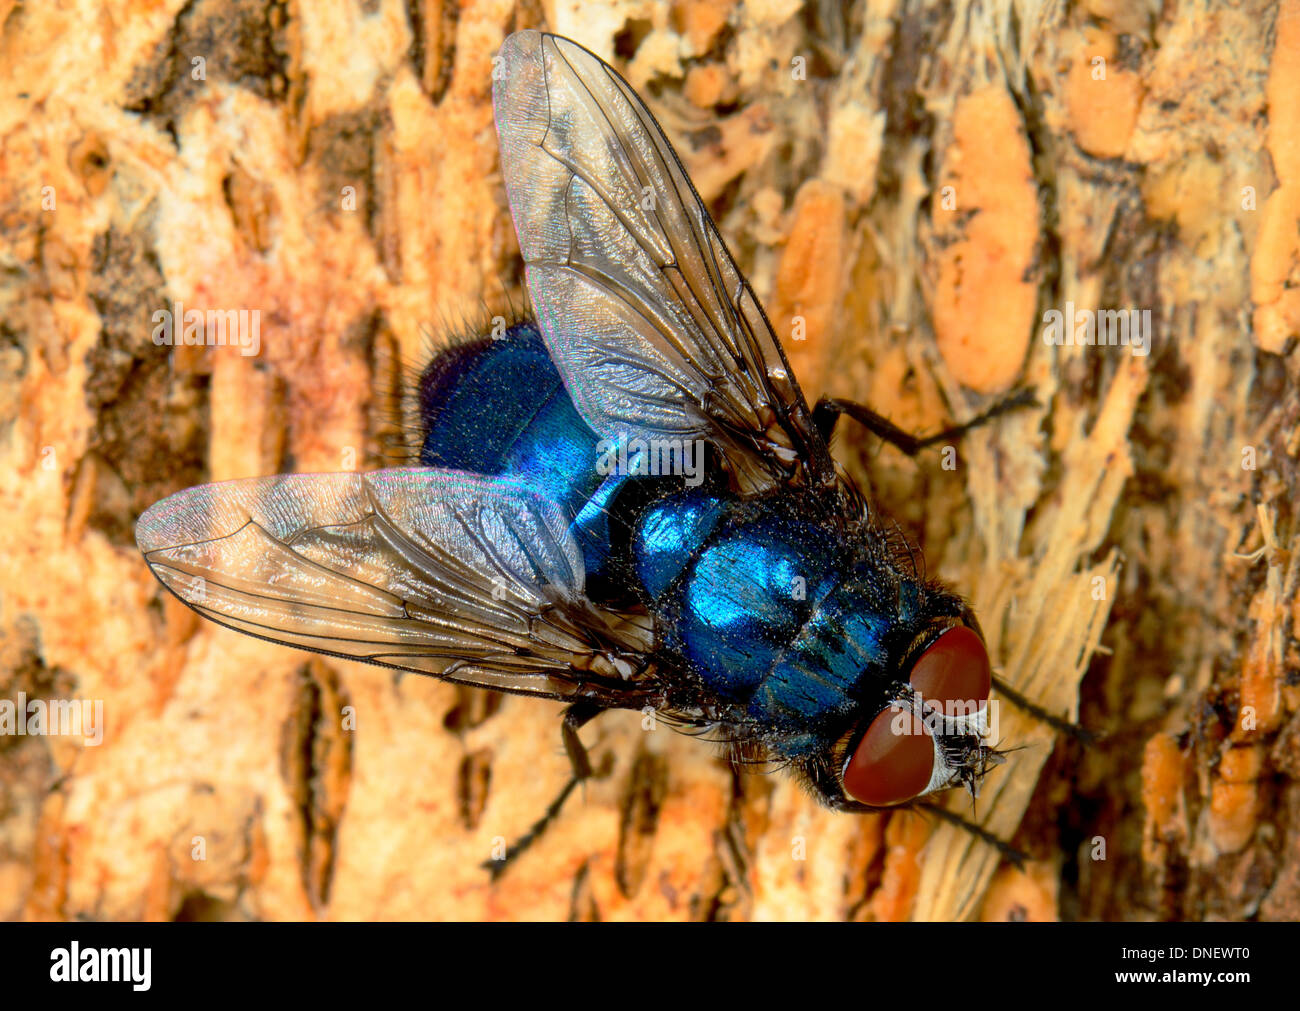 Common bluebottle fly or blowfly ,Calliphora vomitoria on tree bark Stock Photo